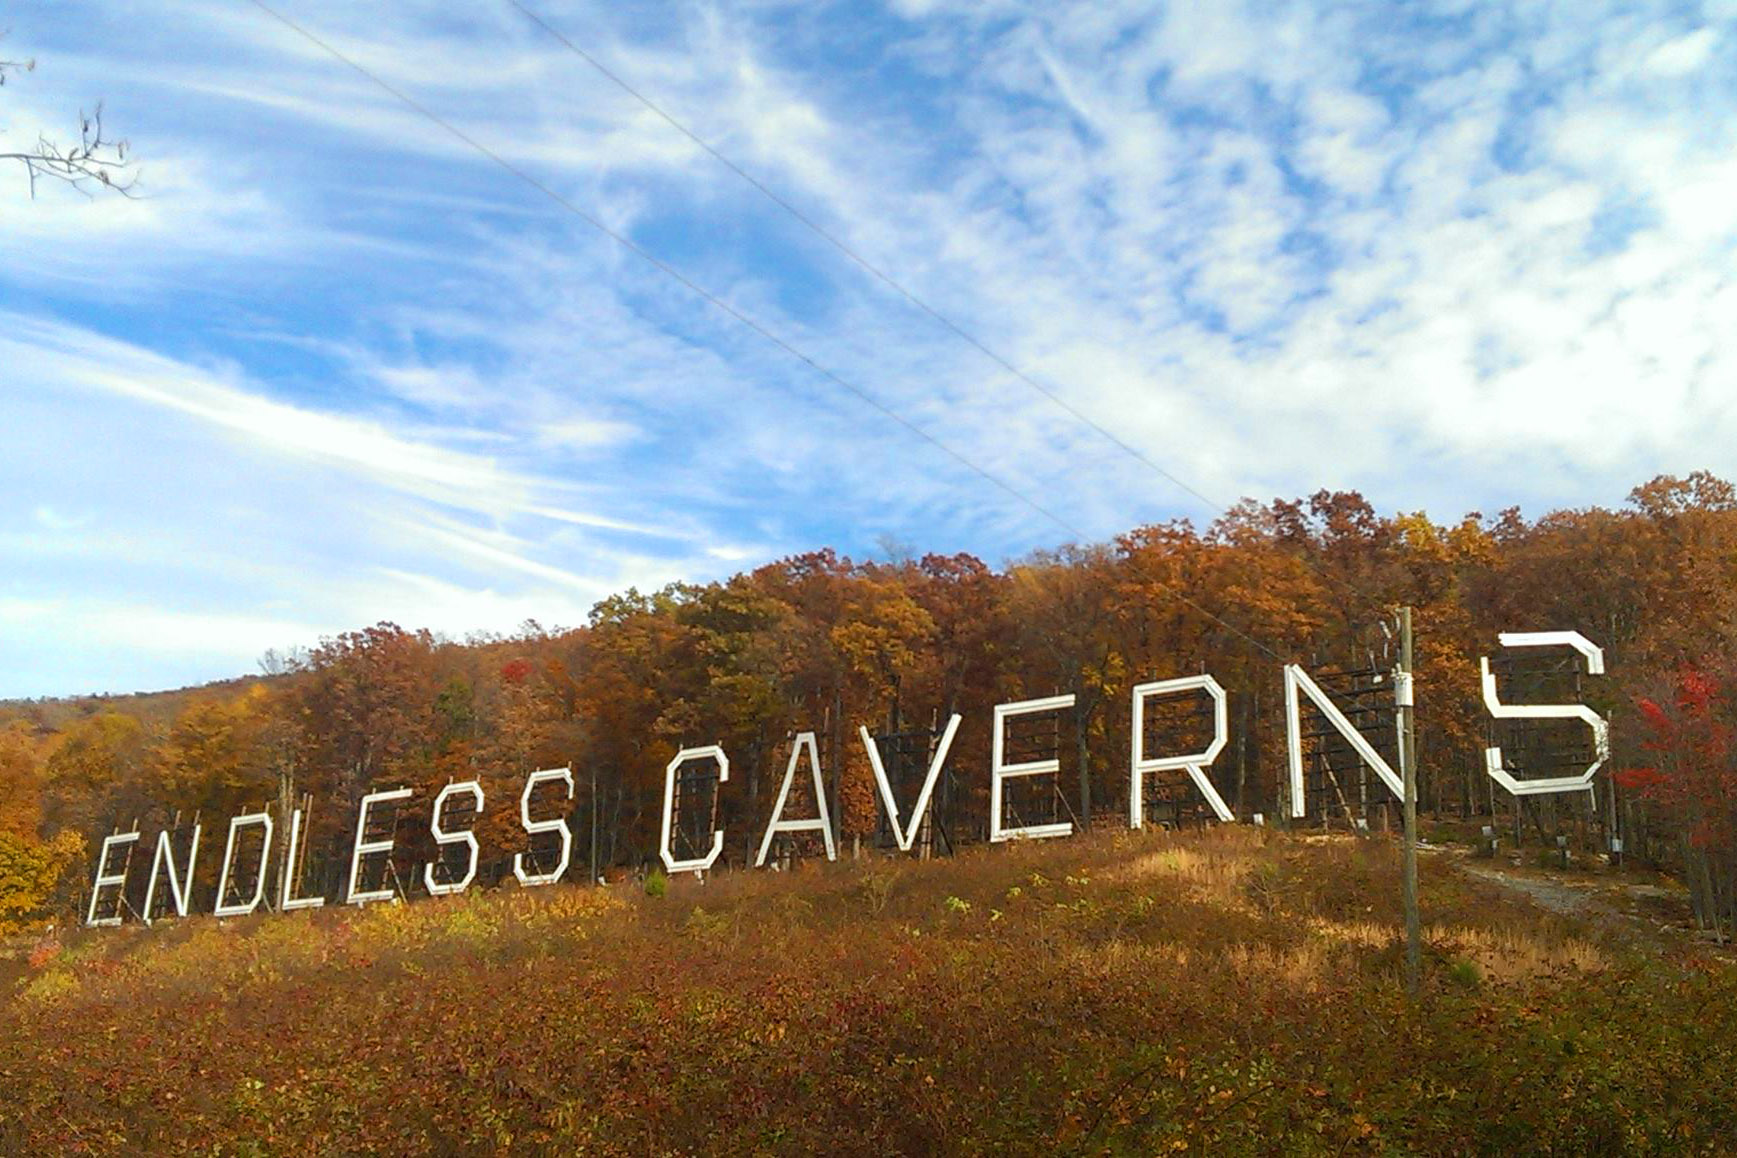 Mountain side displaying the words Endless Caverns